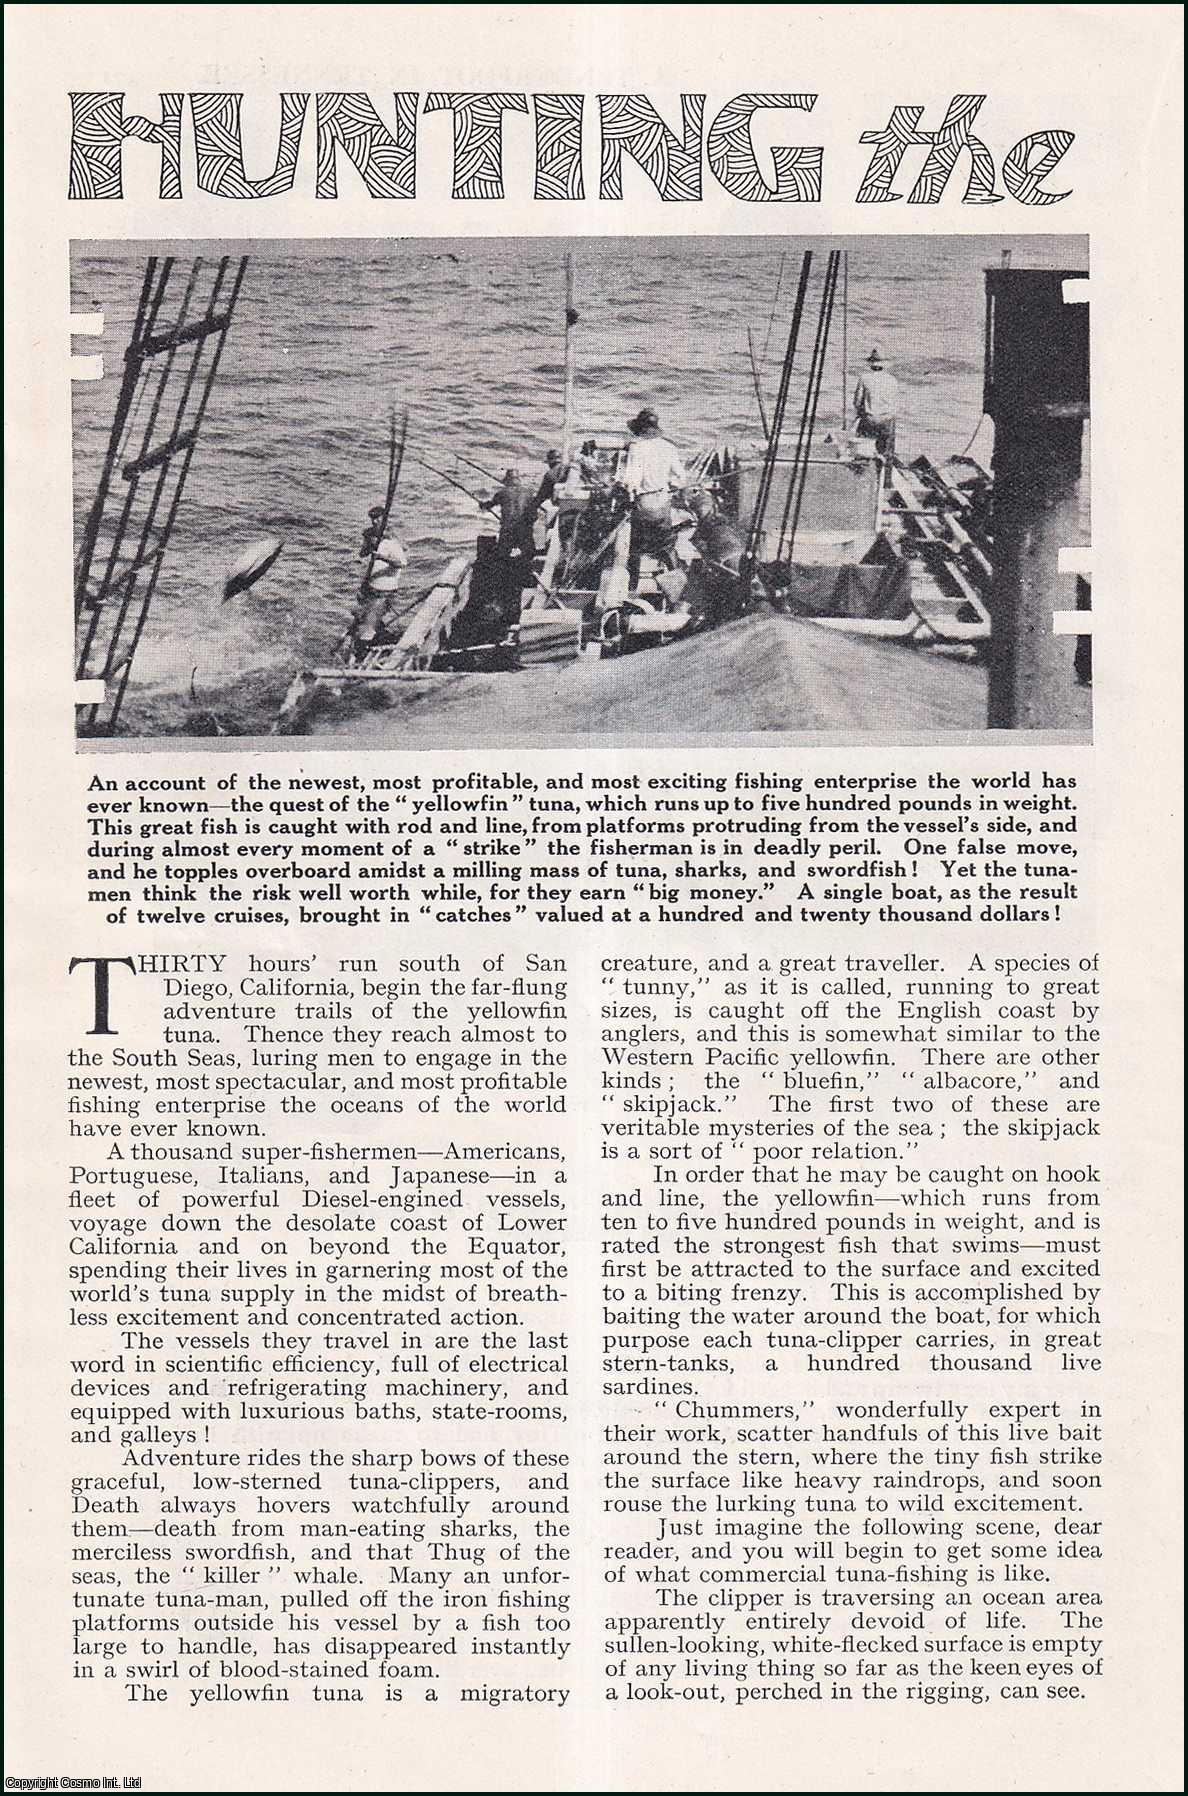 Arthur W. Ponsford - Hunting the Yellowfin Tuna, San Diego, California. An uncommon original article from the Wide World Magazine, 1932.